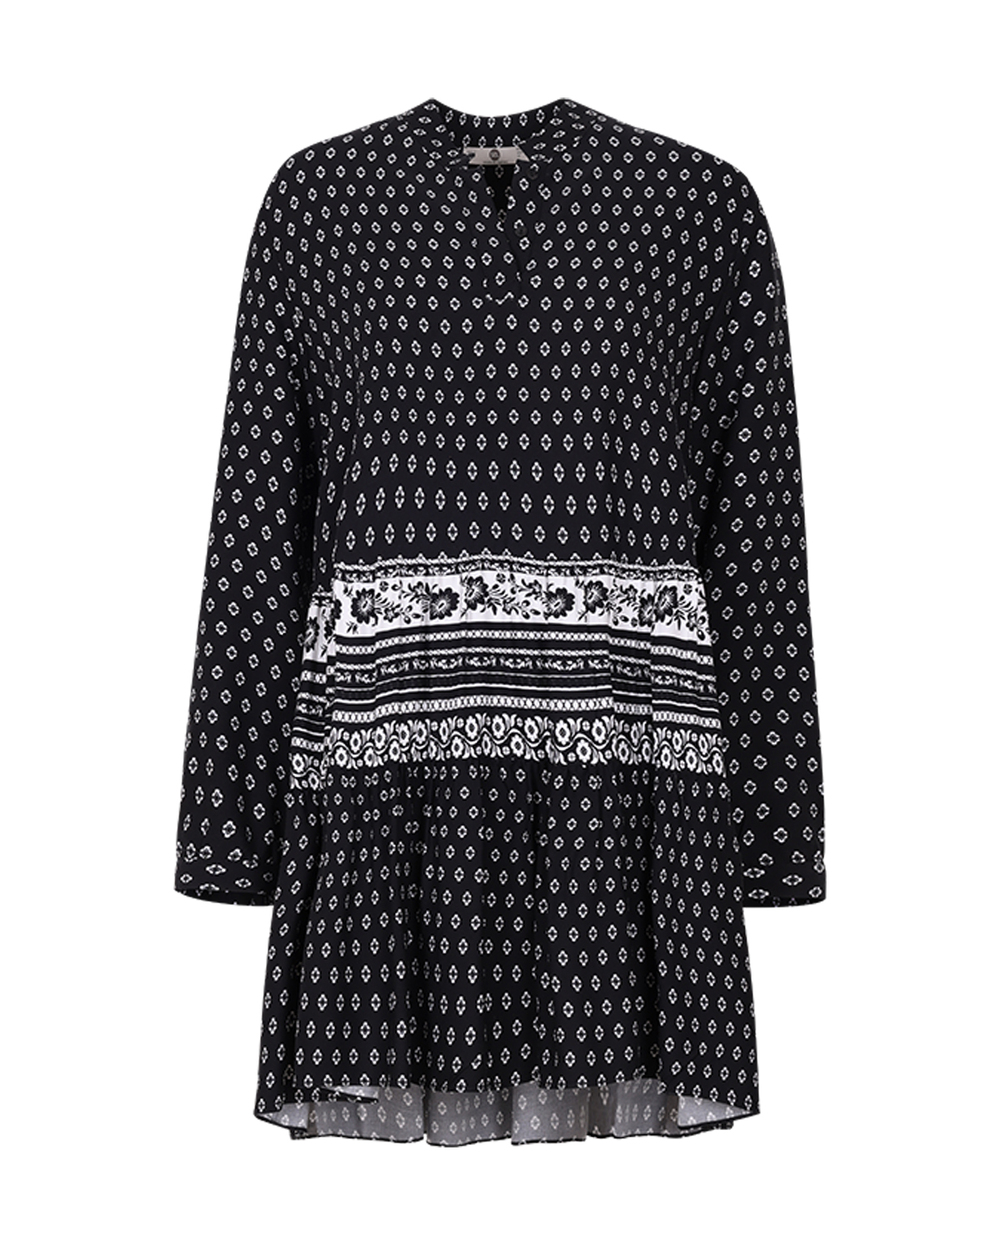  Patterned Tie Collar Tunic